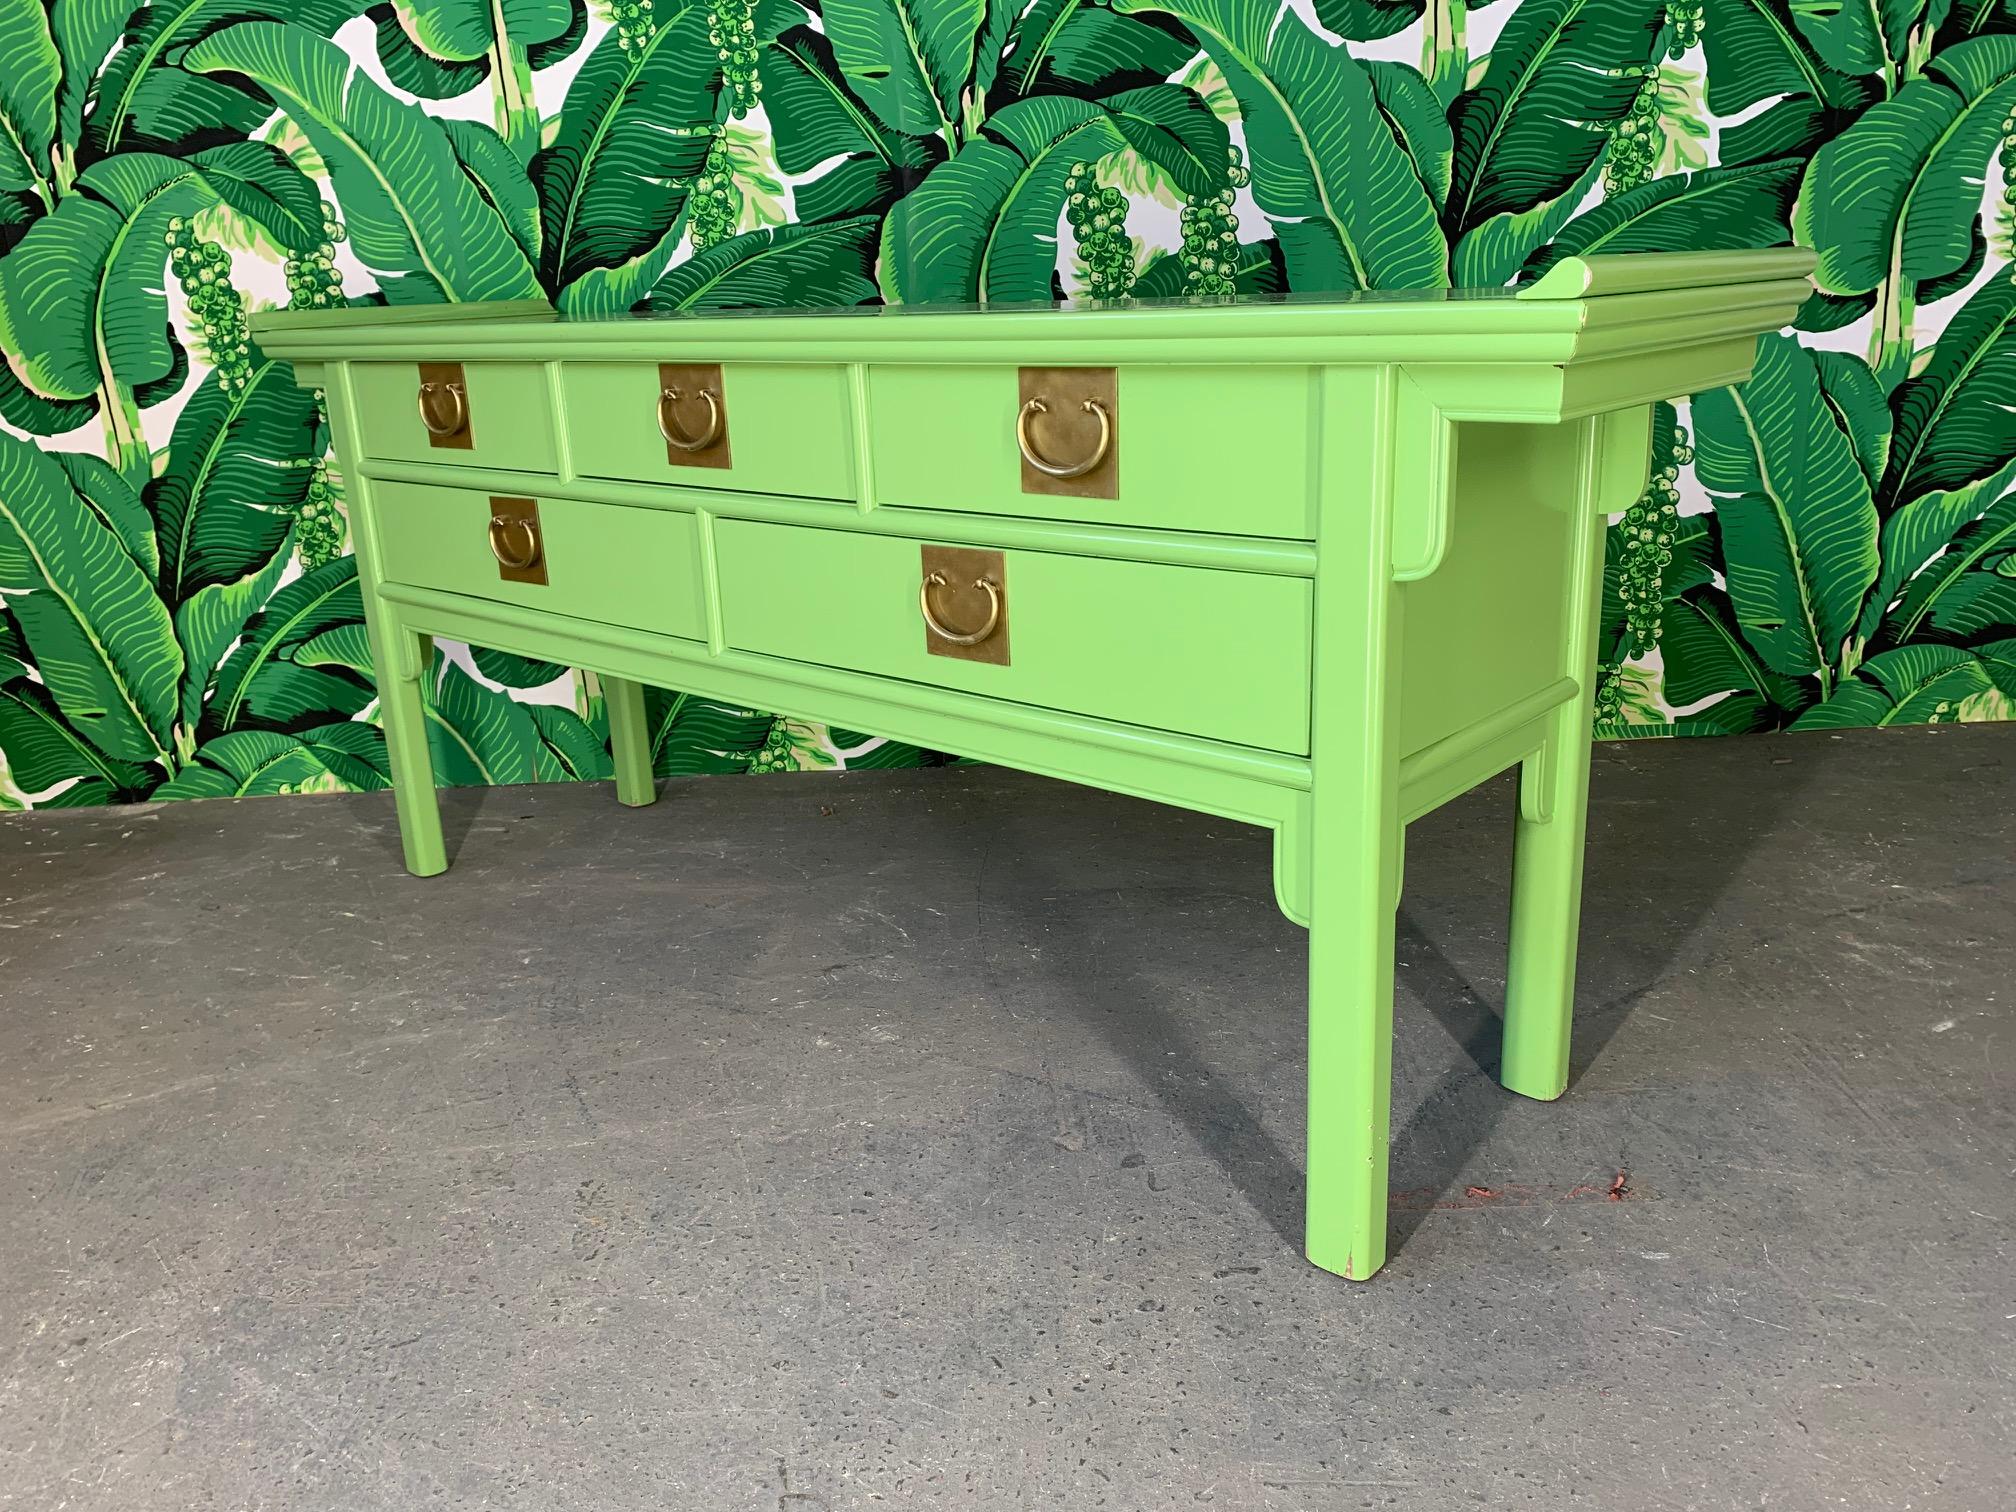 Asian chinoiserie style console table by Century Furniture features heavy brass hardware and a glossy green lacquered finish. Very good condition with minor imperfections to the finish.